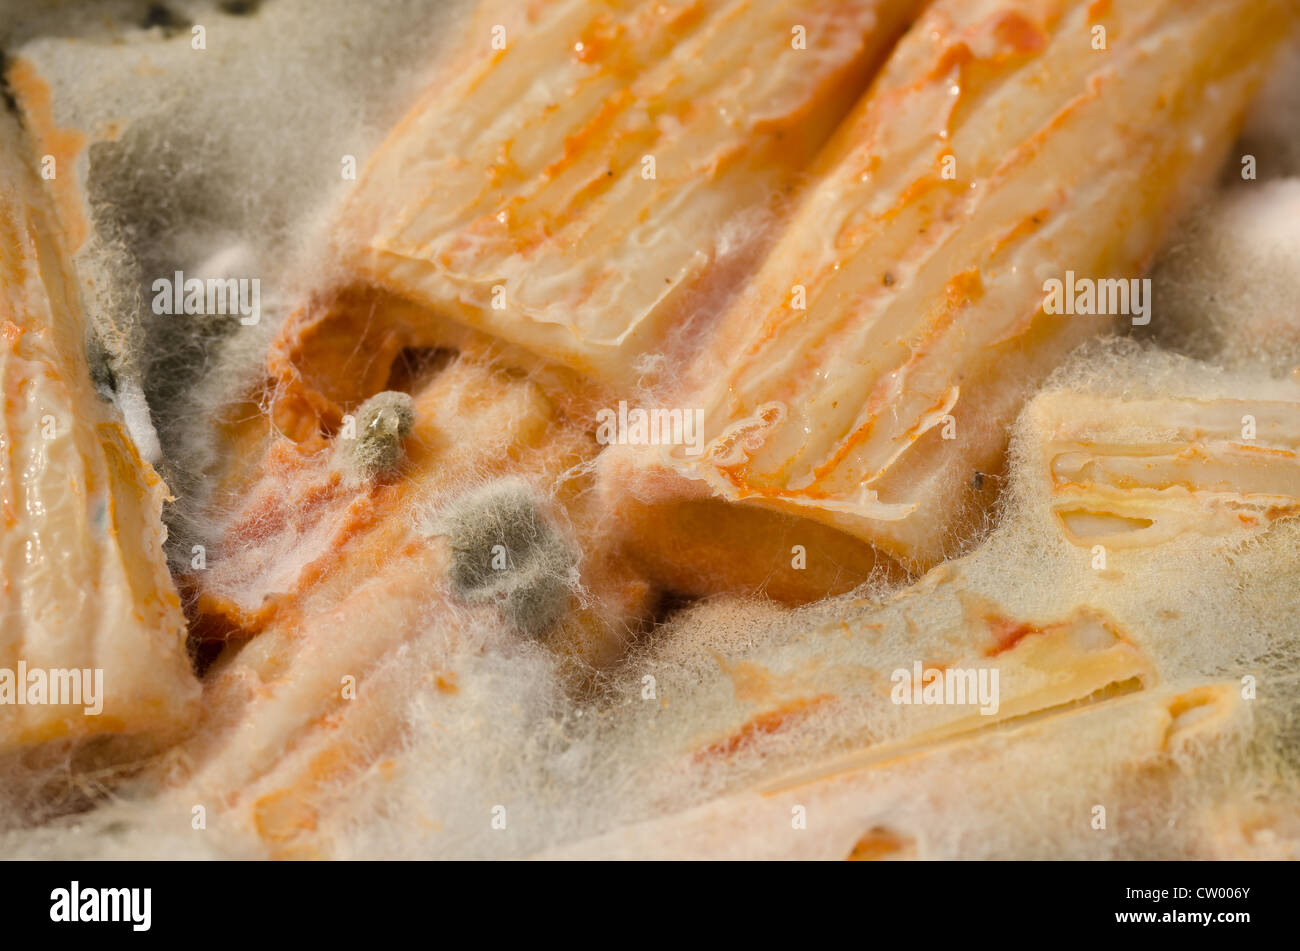 Mouldy pasta lunch box school meal forgotten penicillin growth impregnated with hyphae long branching filamentous structure Stock Photo